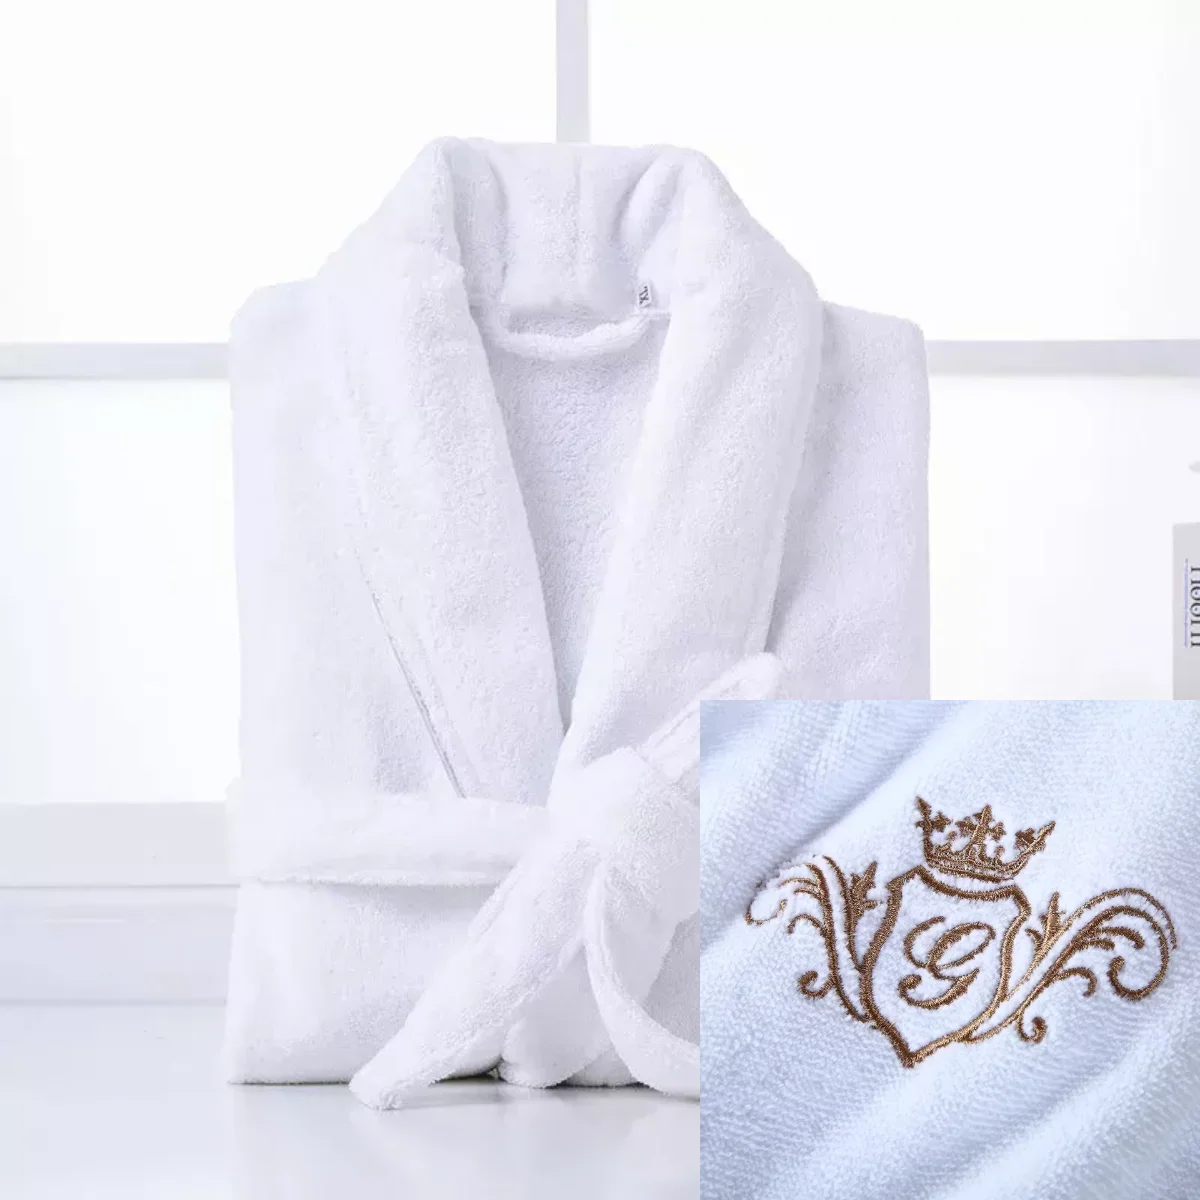 Personalised Embroidered Terry Toweling Cotton Bathrobe Bath Robe White 